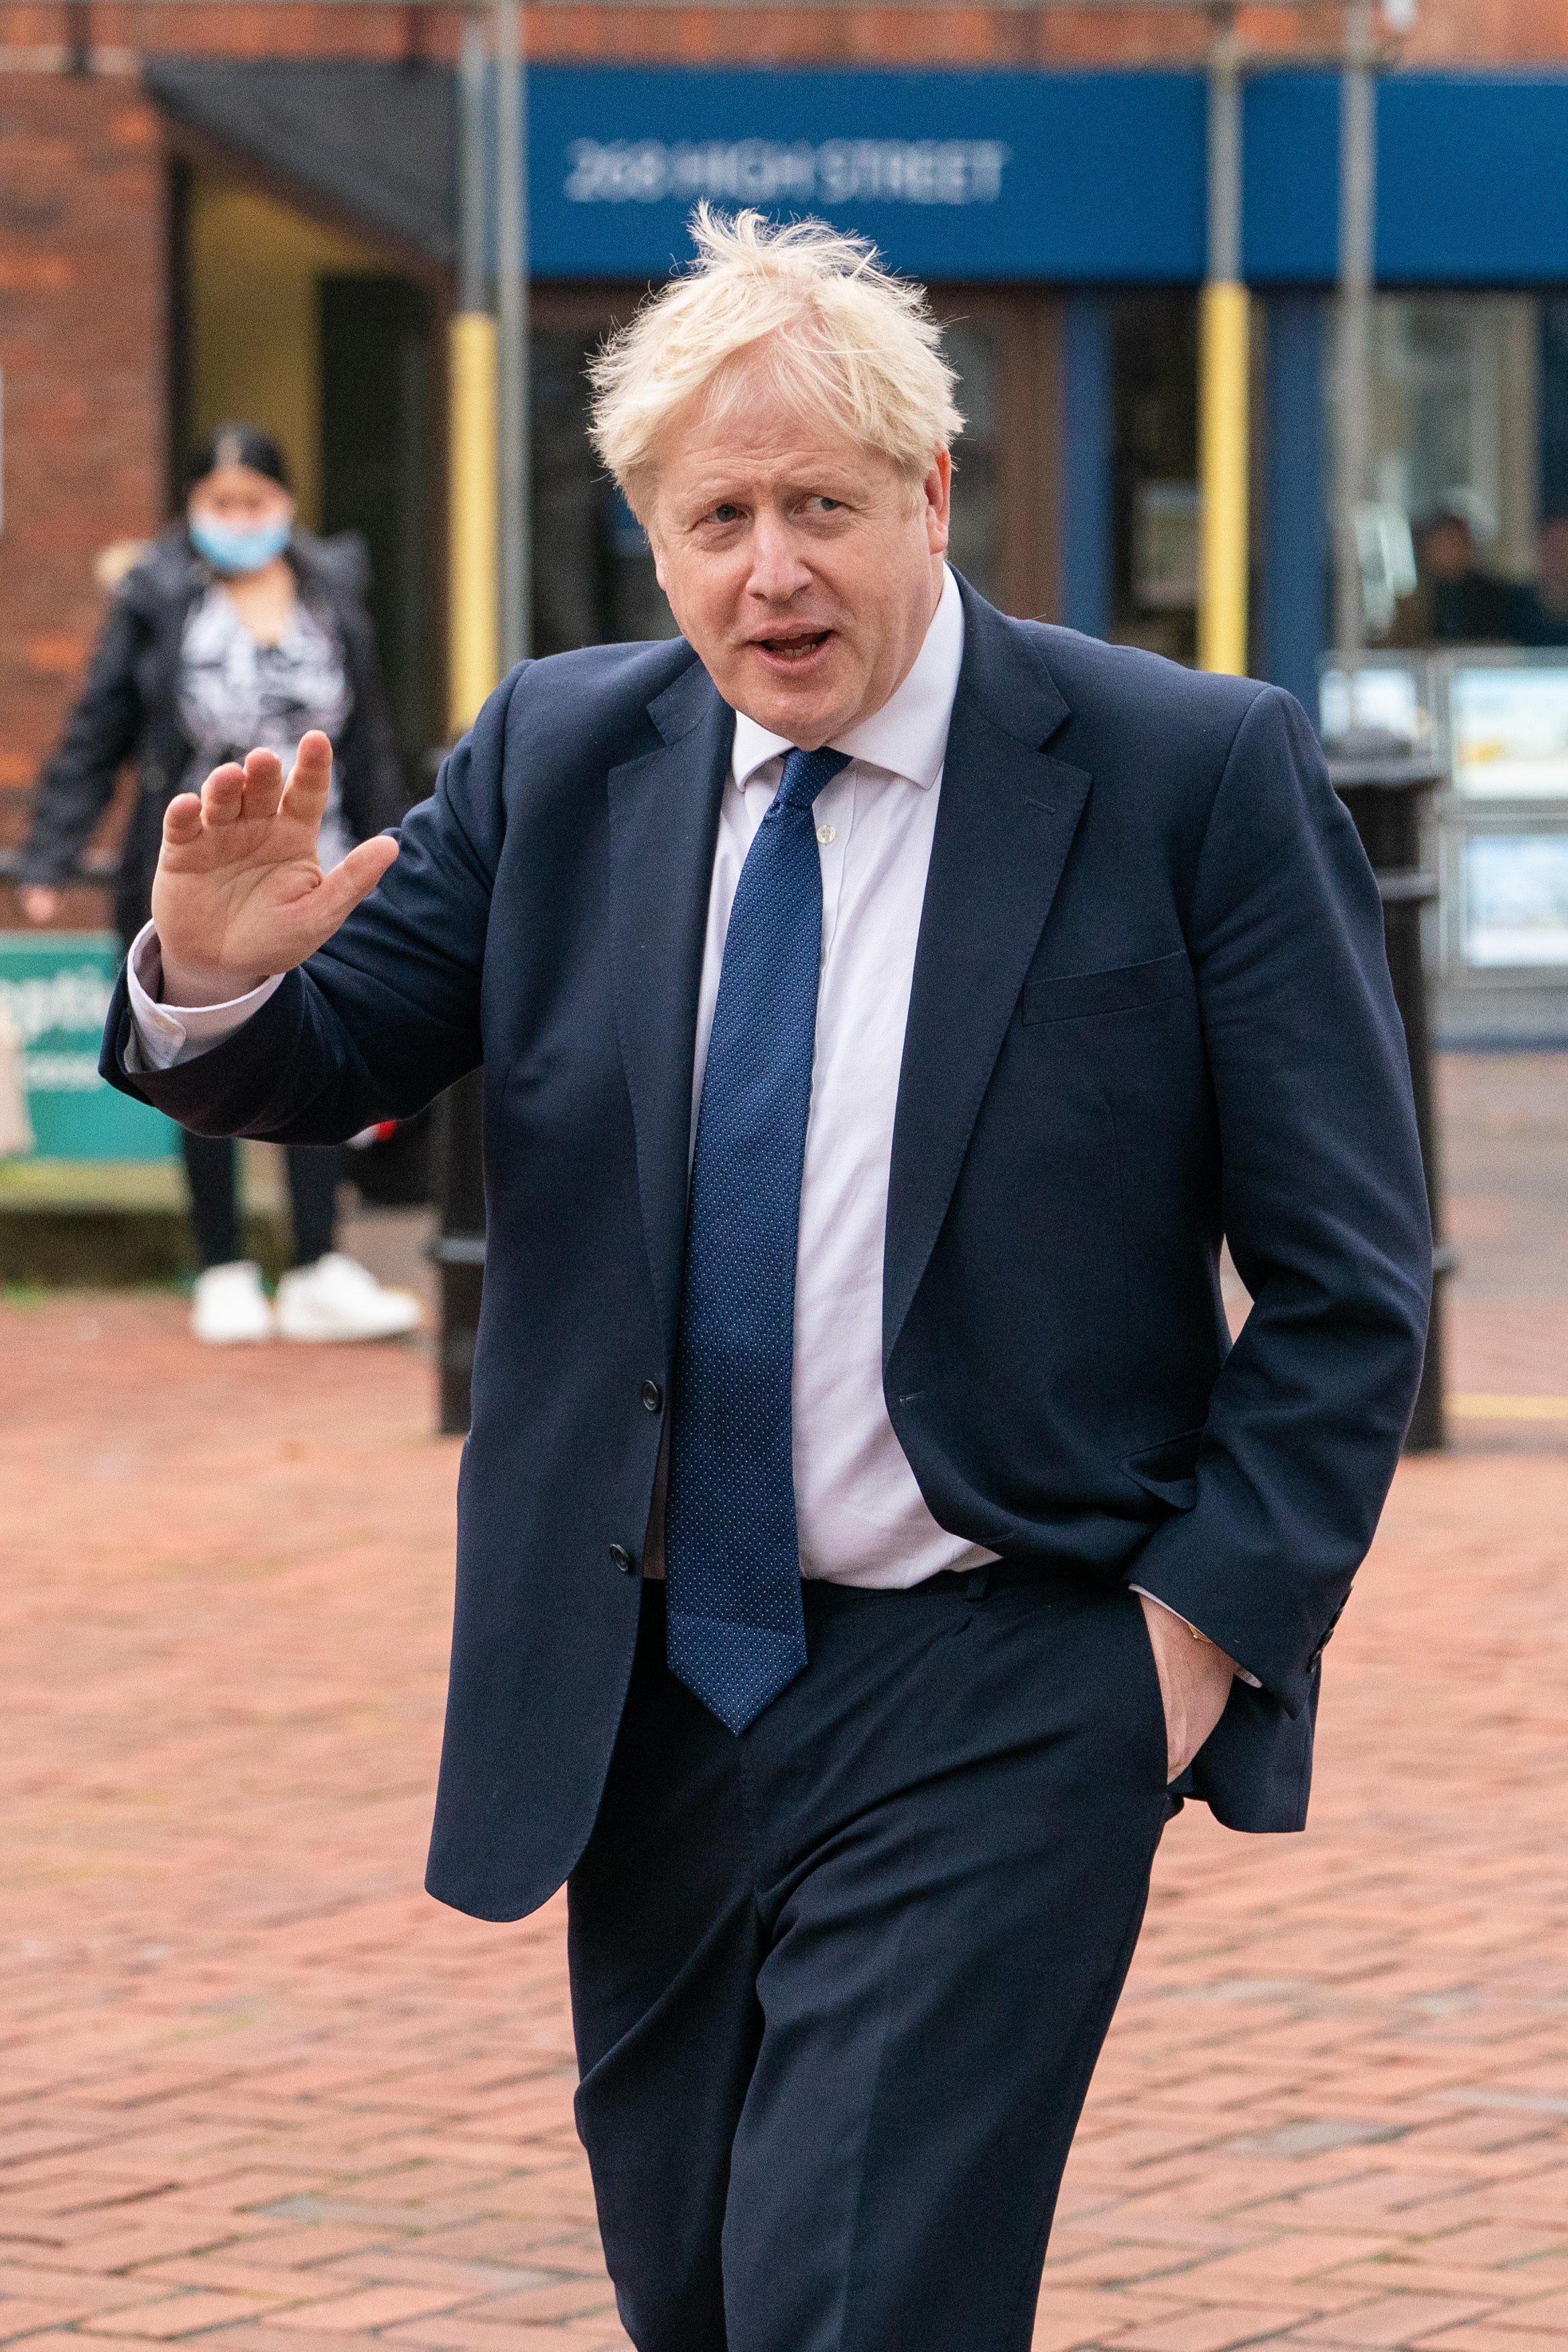 Prime Minister Boris Johnson refused to say whether he attended the gathering in May 2020.